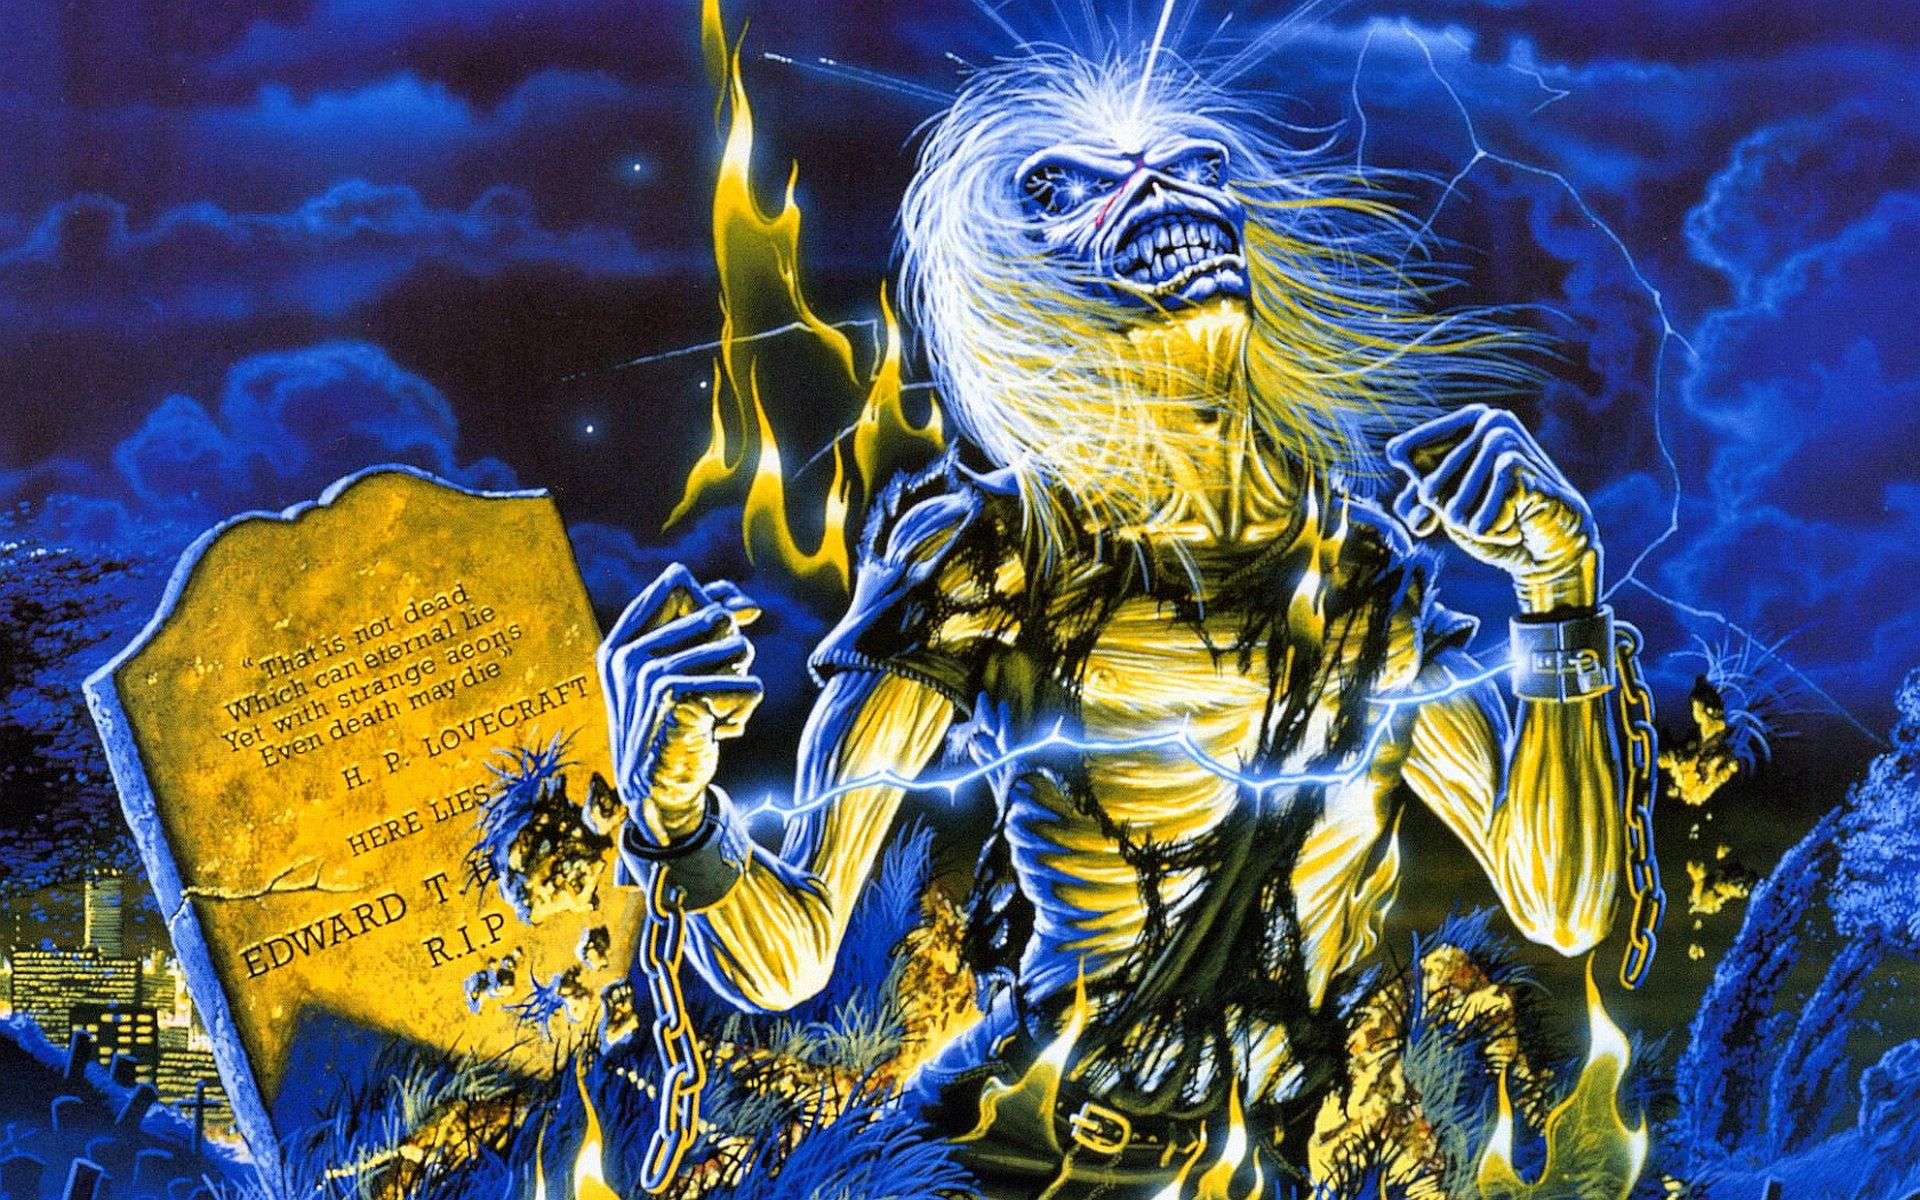 Iron Maiden Backgrounds